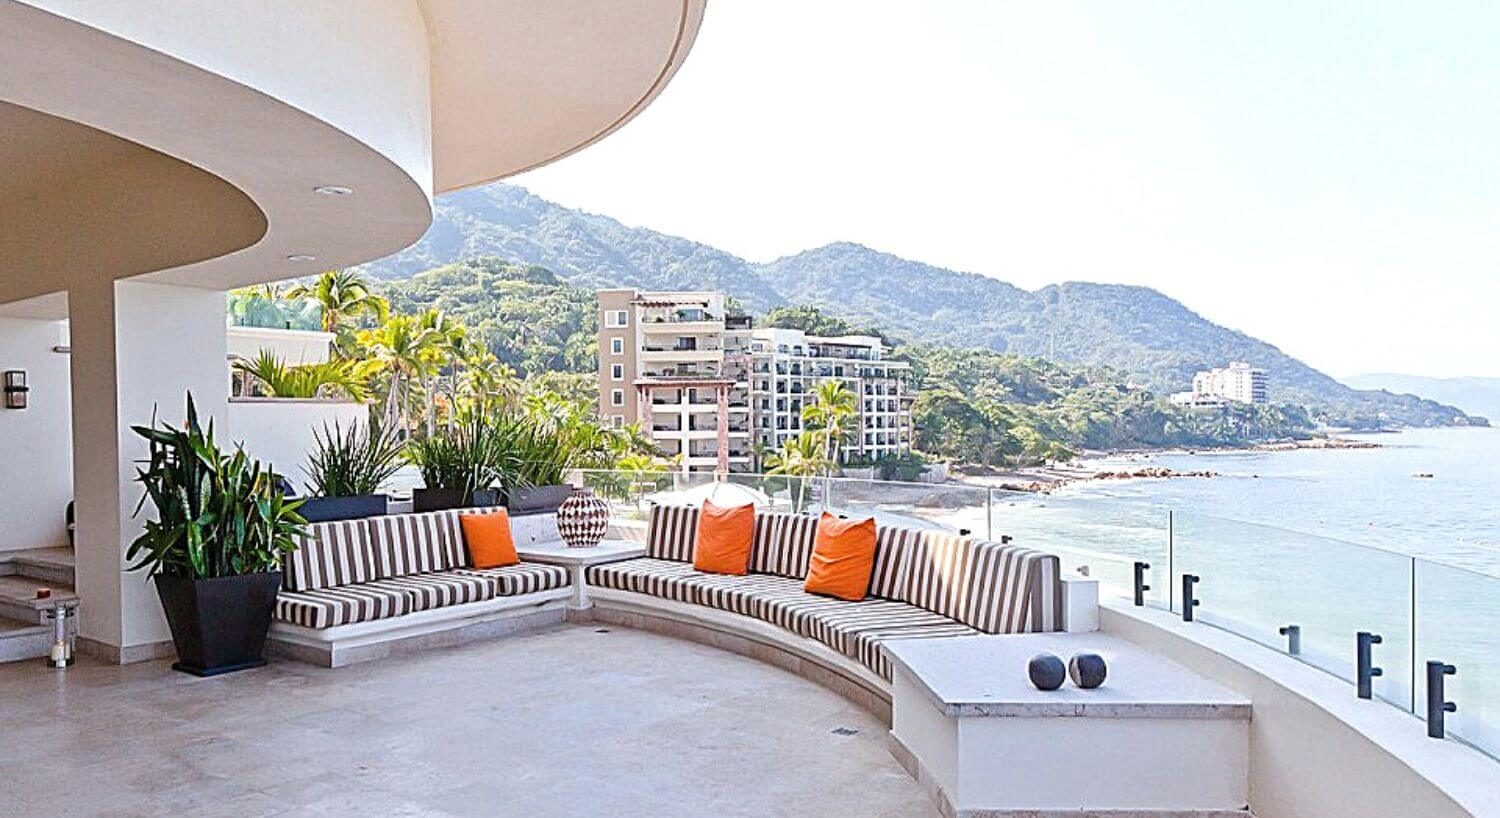 A large outdoor living area at a private penthouse with outdoor brown and white striped sofas with orange throw pillows, with views of the ocean, mountains, and other hotel buildings.